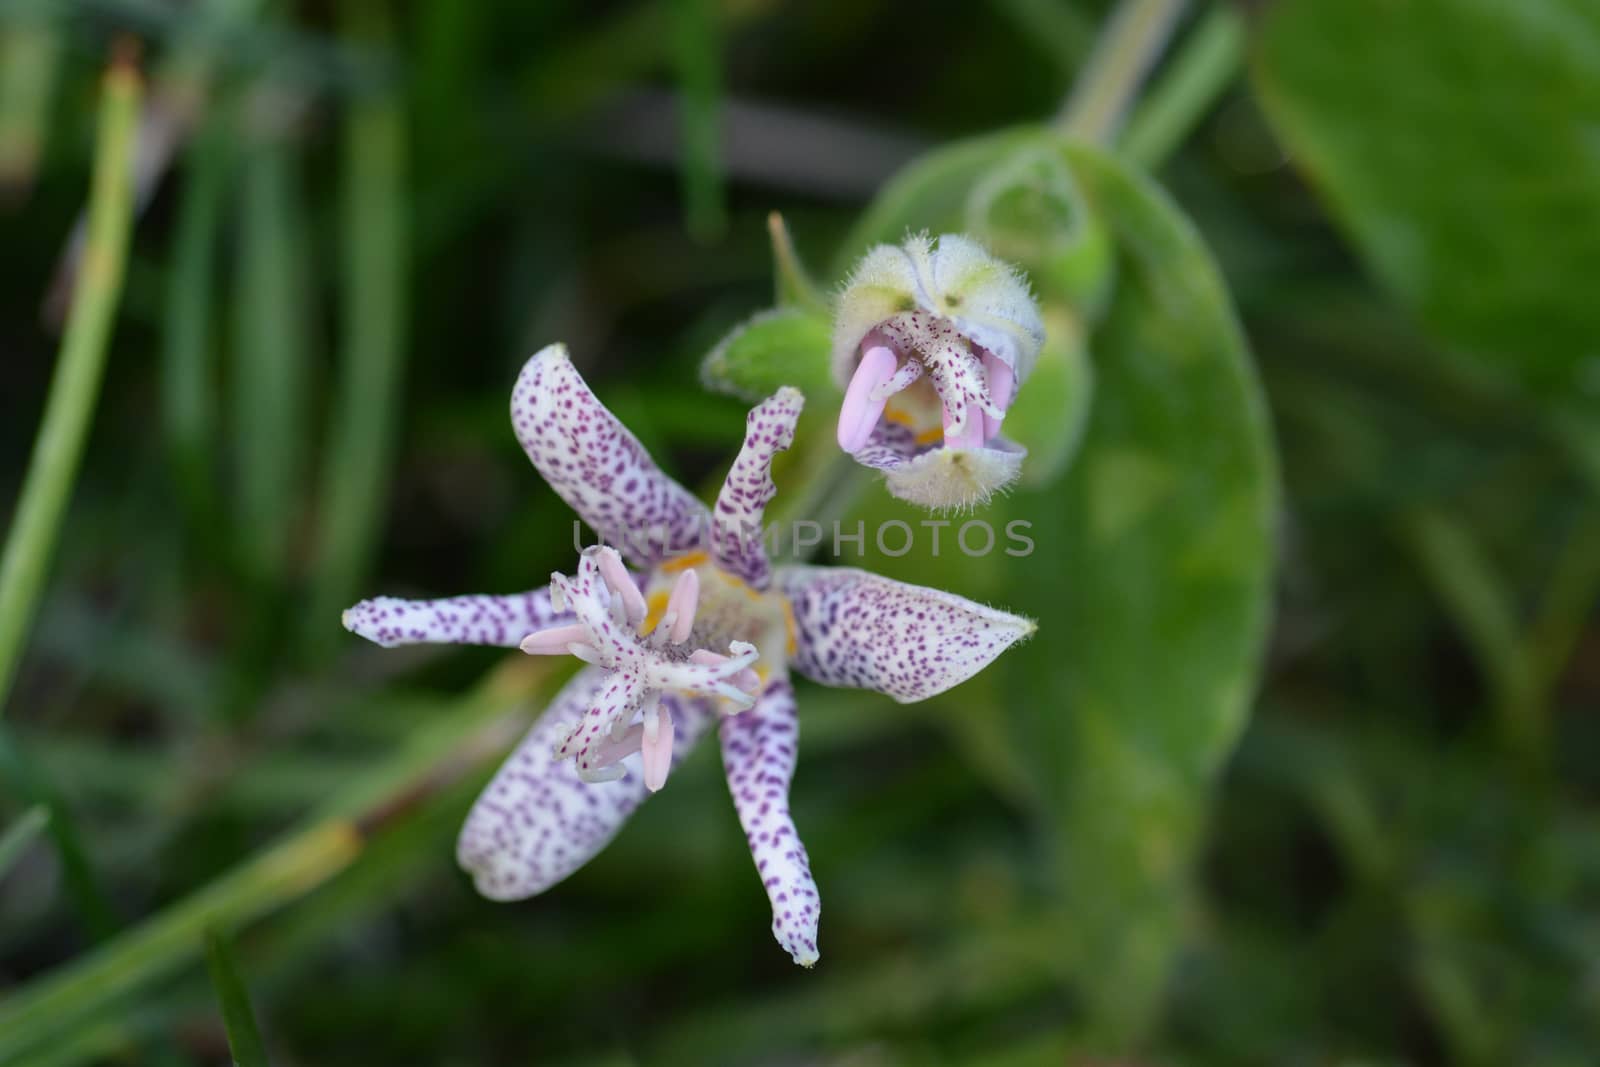 Hairy toad lily by nahhan